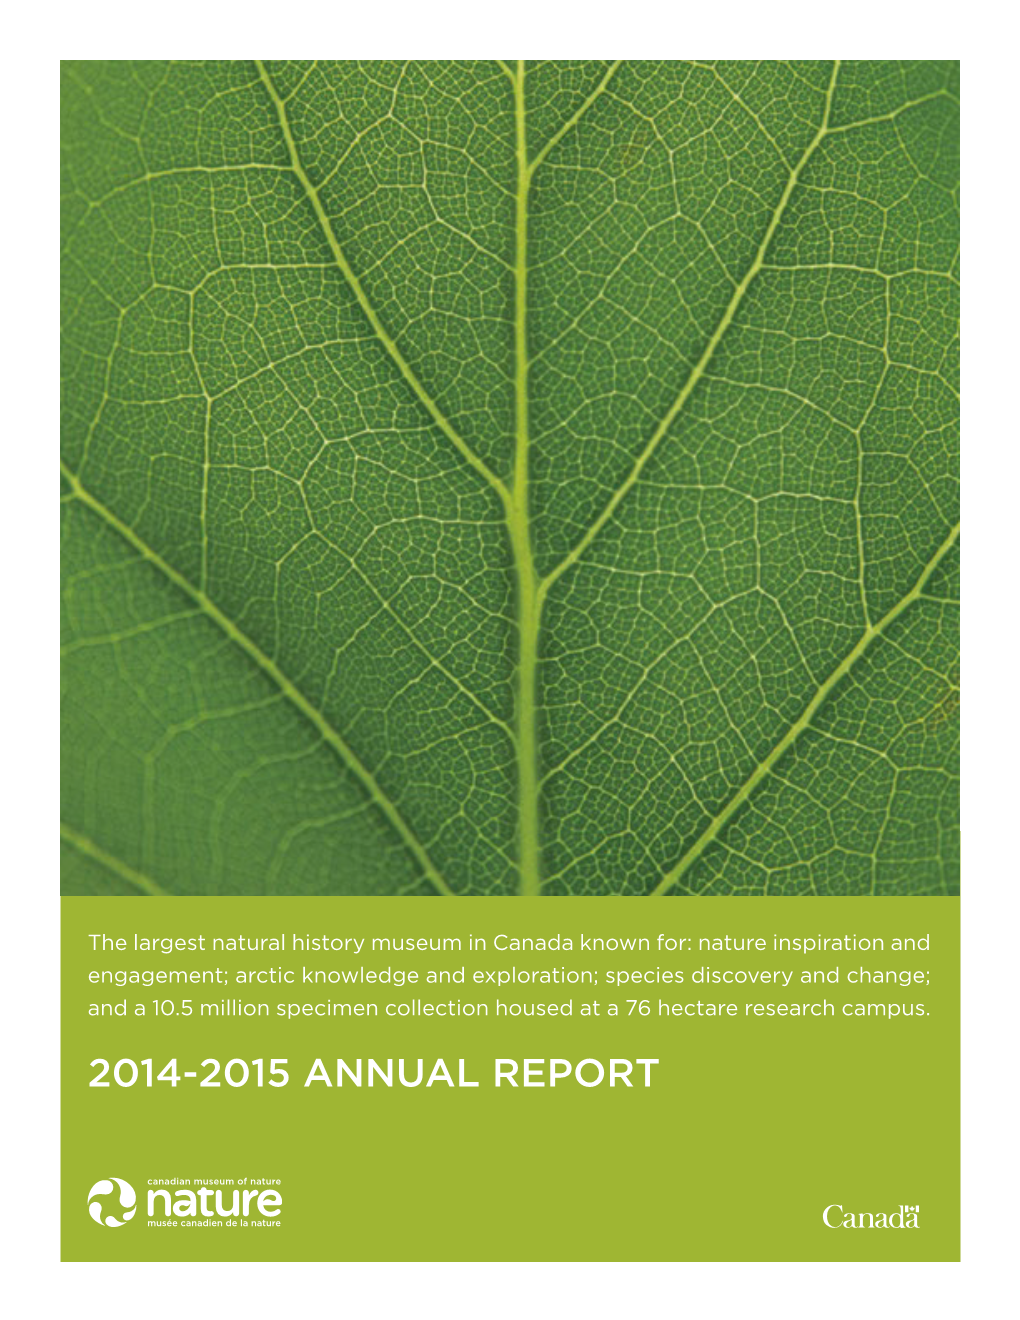 Annual Report Table of Contents